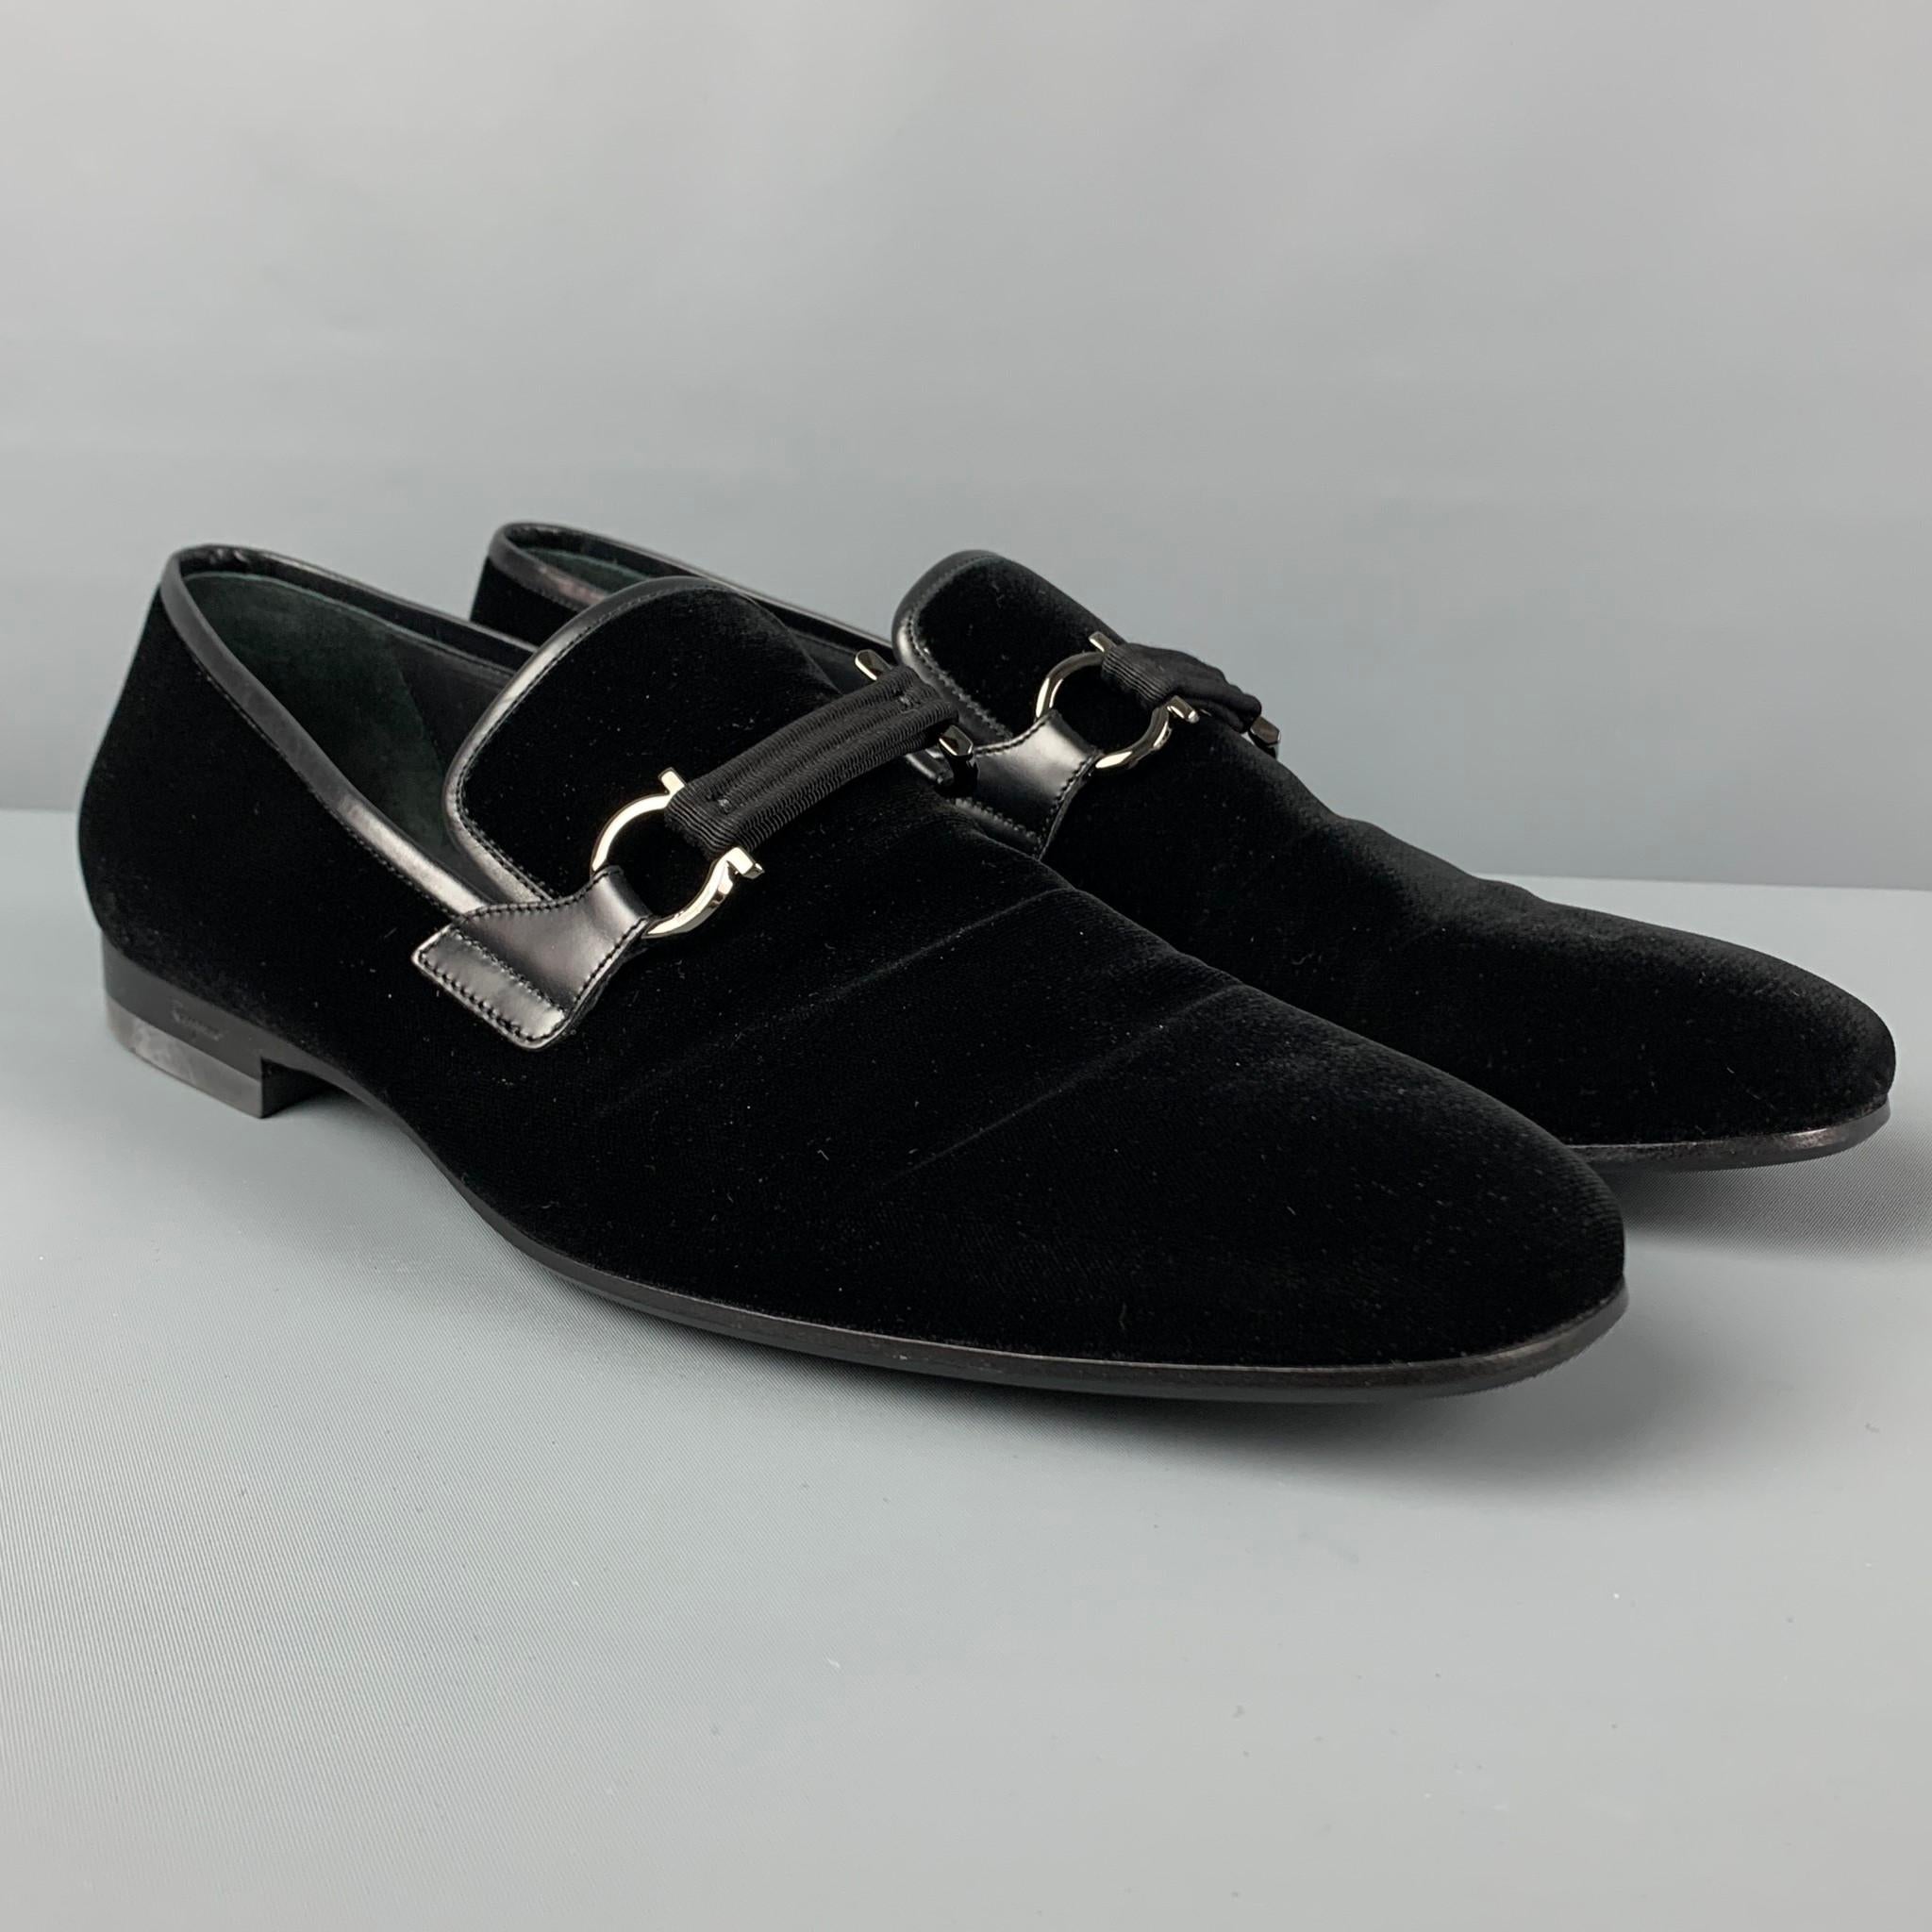 SALVATORE FERRAGAMO 'Lapo' loafers comes in a black velvet with a leather trim featuring a grosgrain strap with a gancino hardware, round toe, slip-on style, and a stacked heel. Includes box. Made in Italy. 

Very Good Pre-Owned Condition.
Marked: